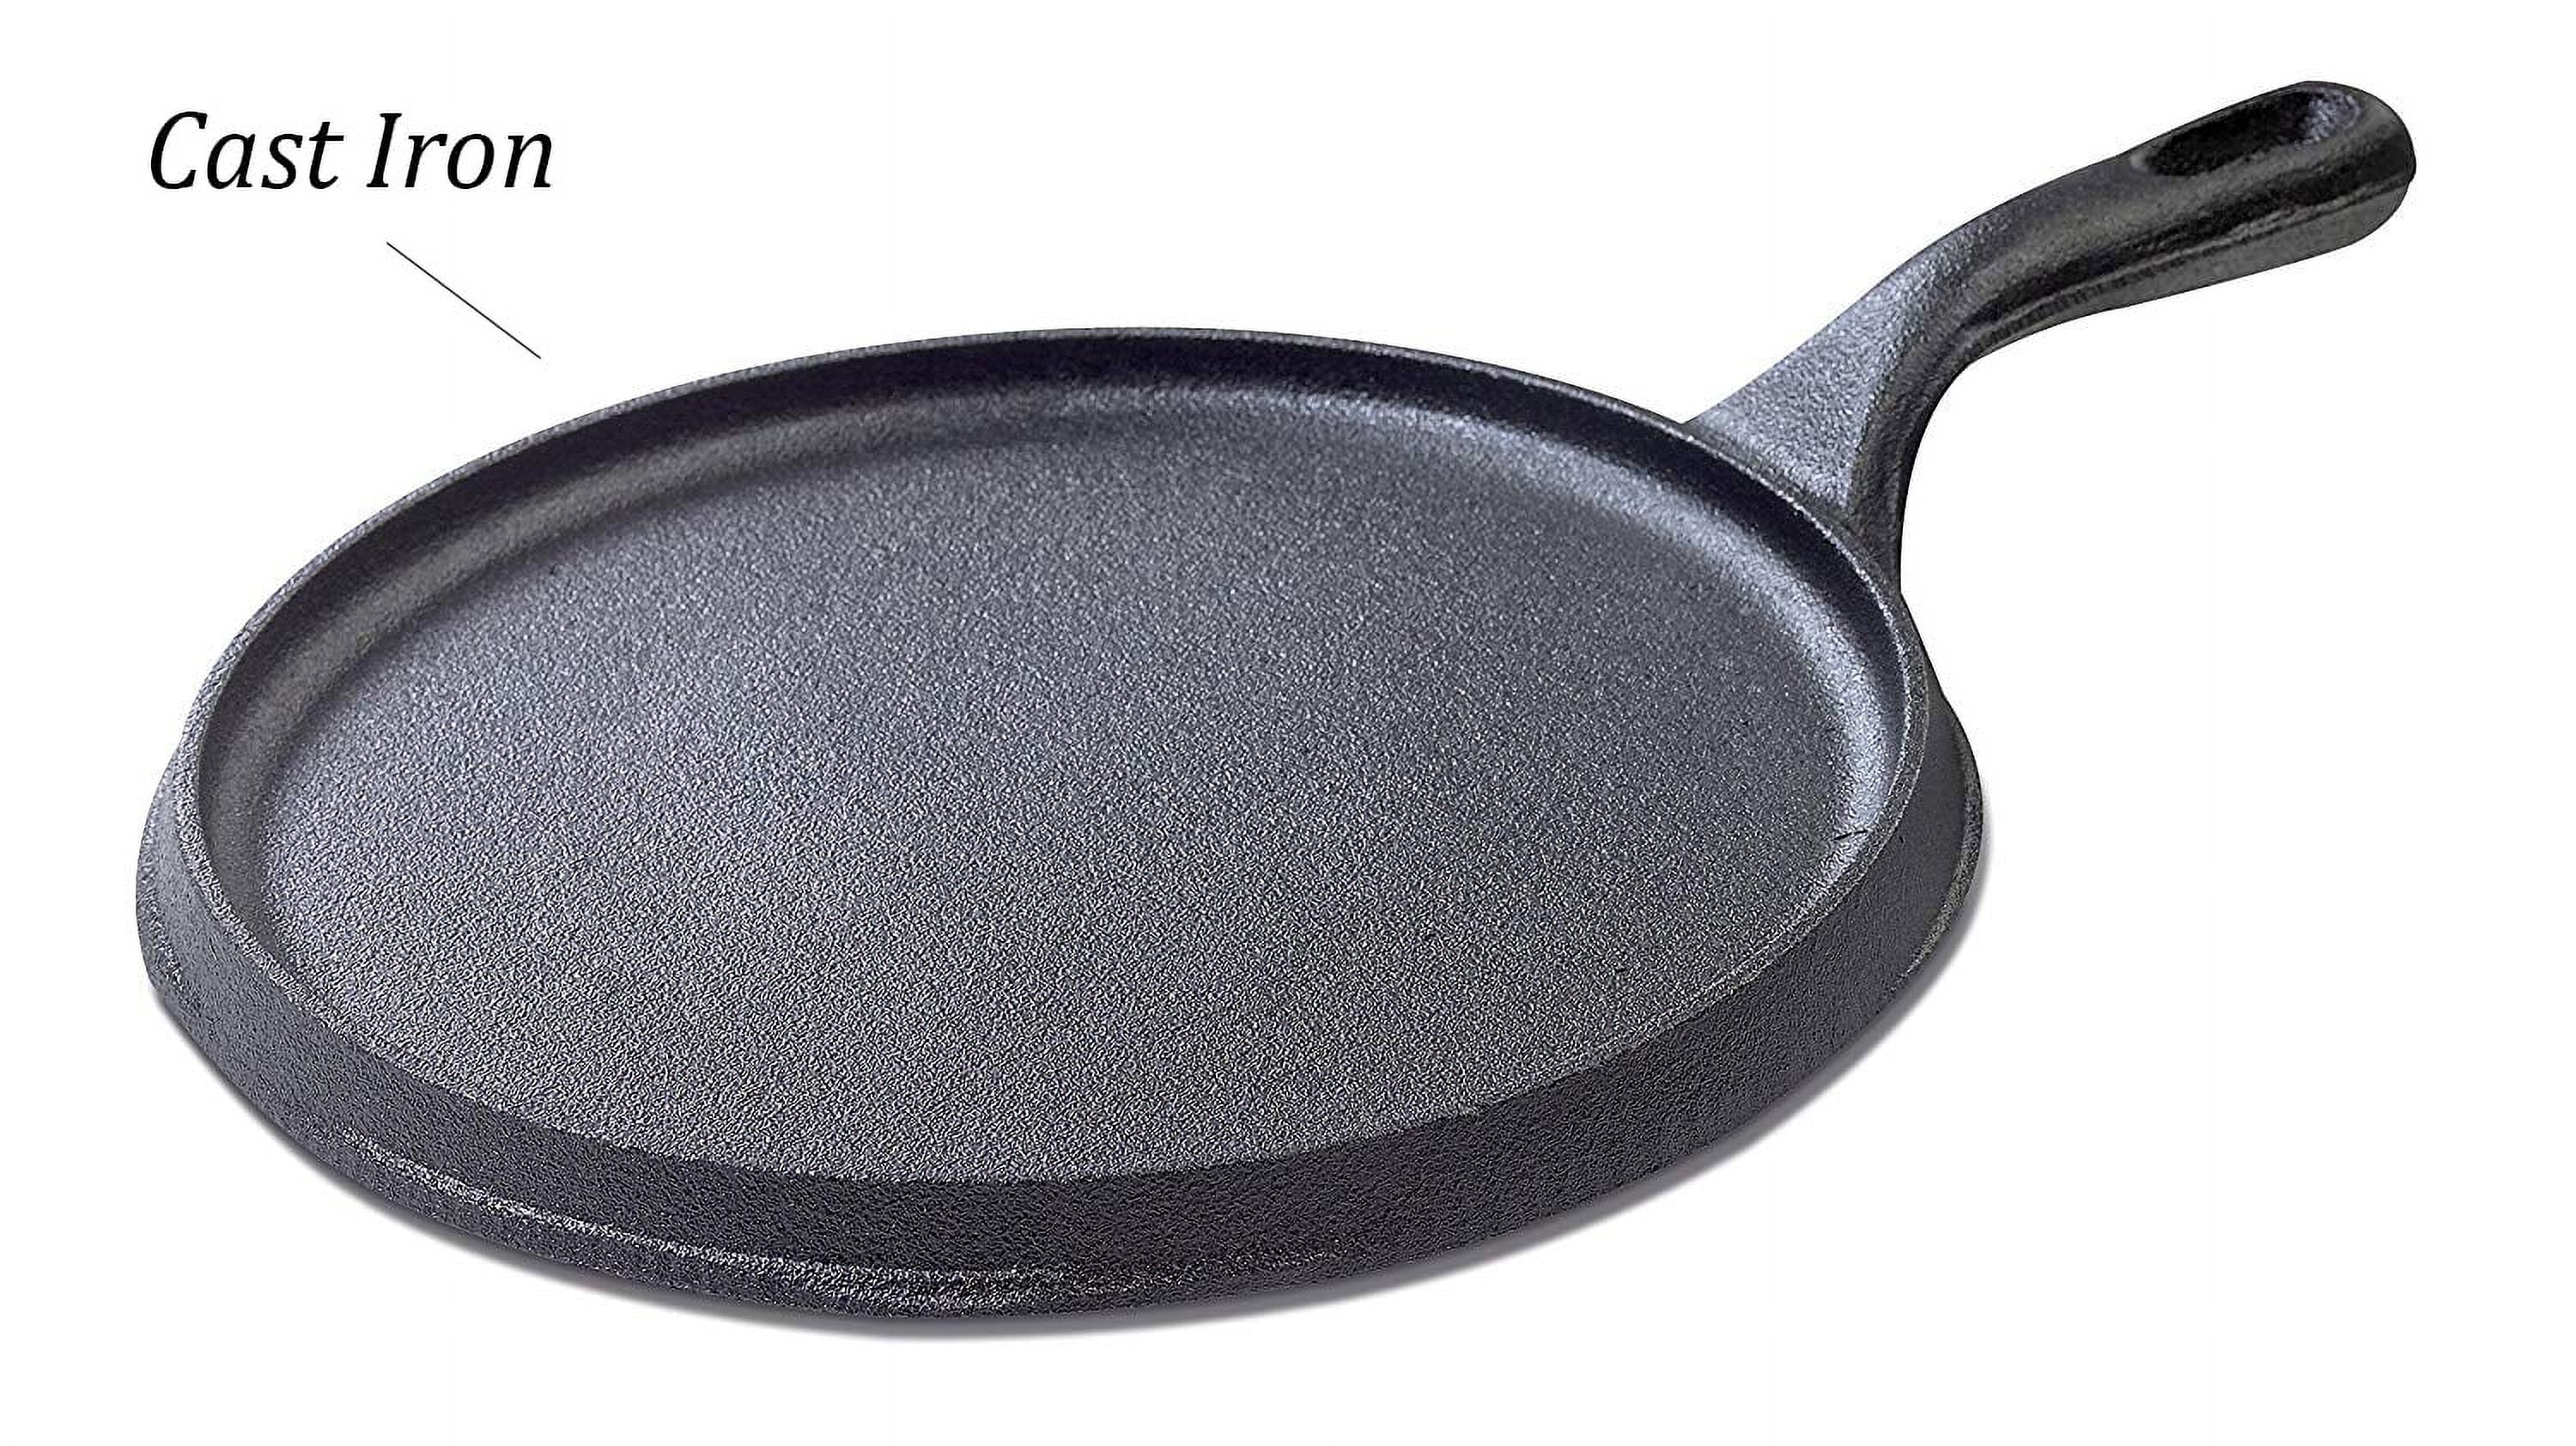 Caring for a Cast Iron Comal